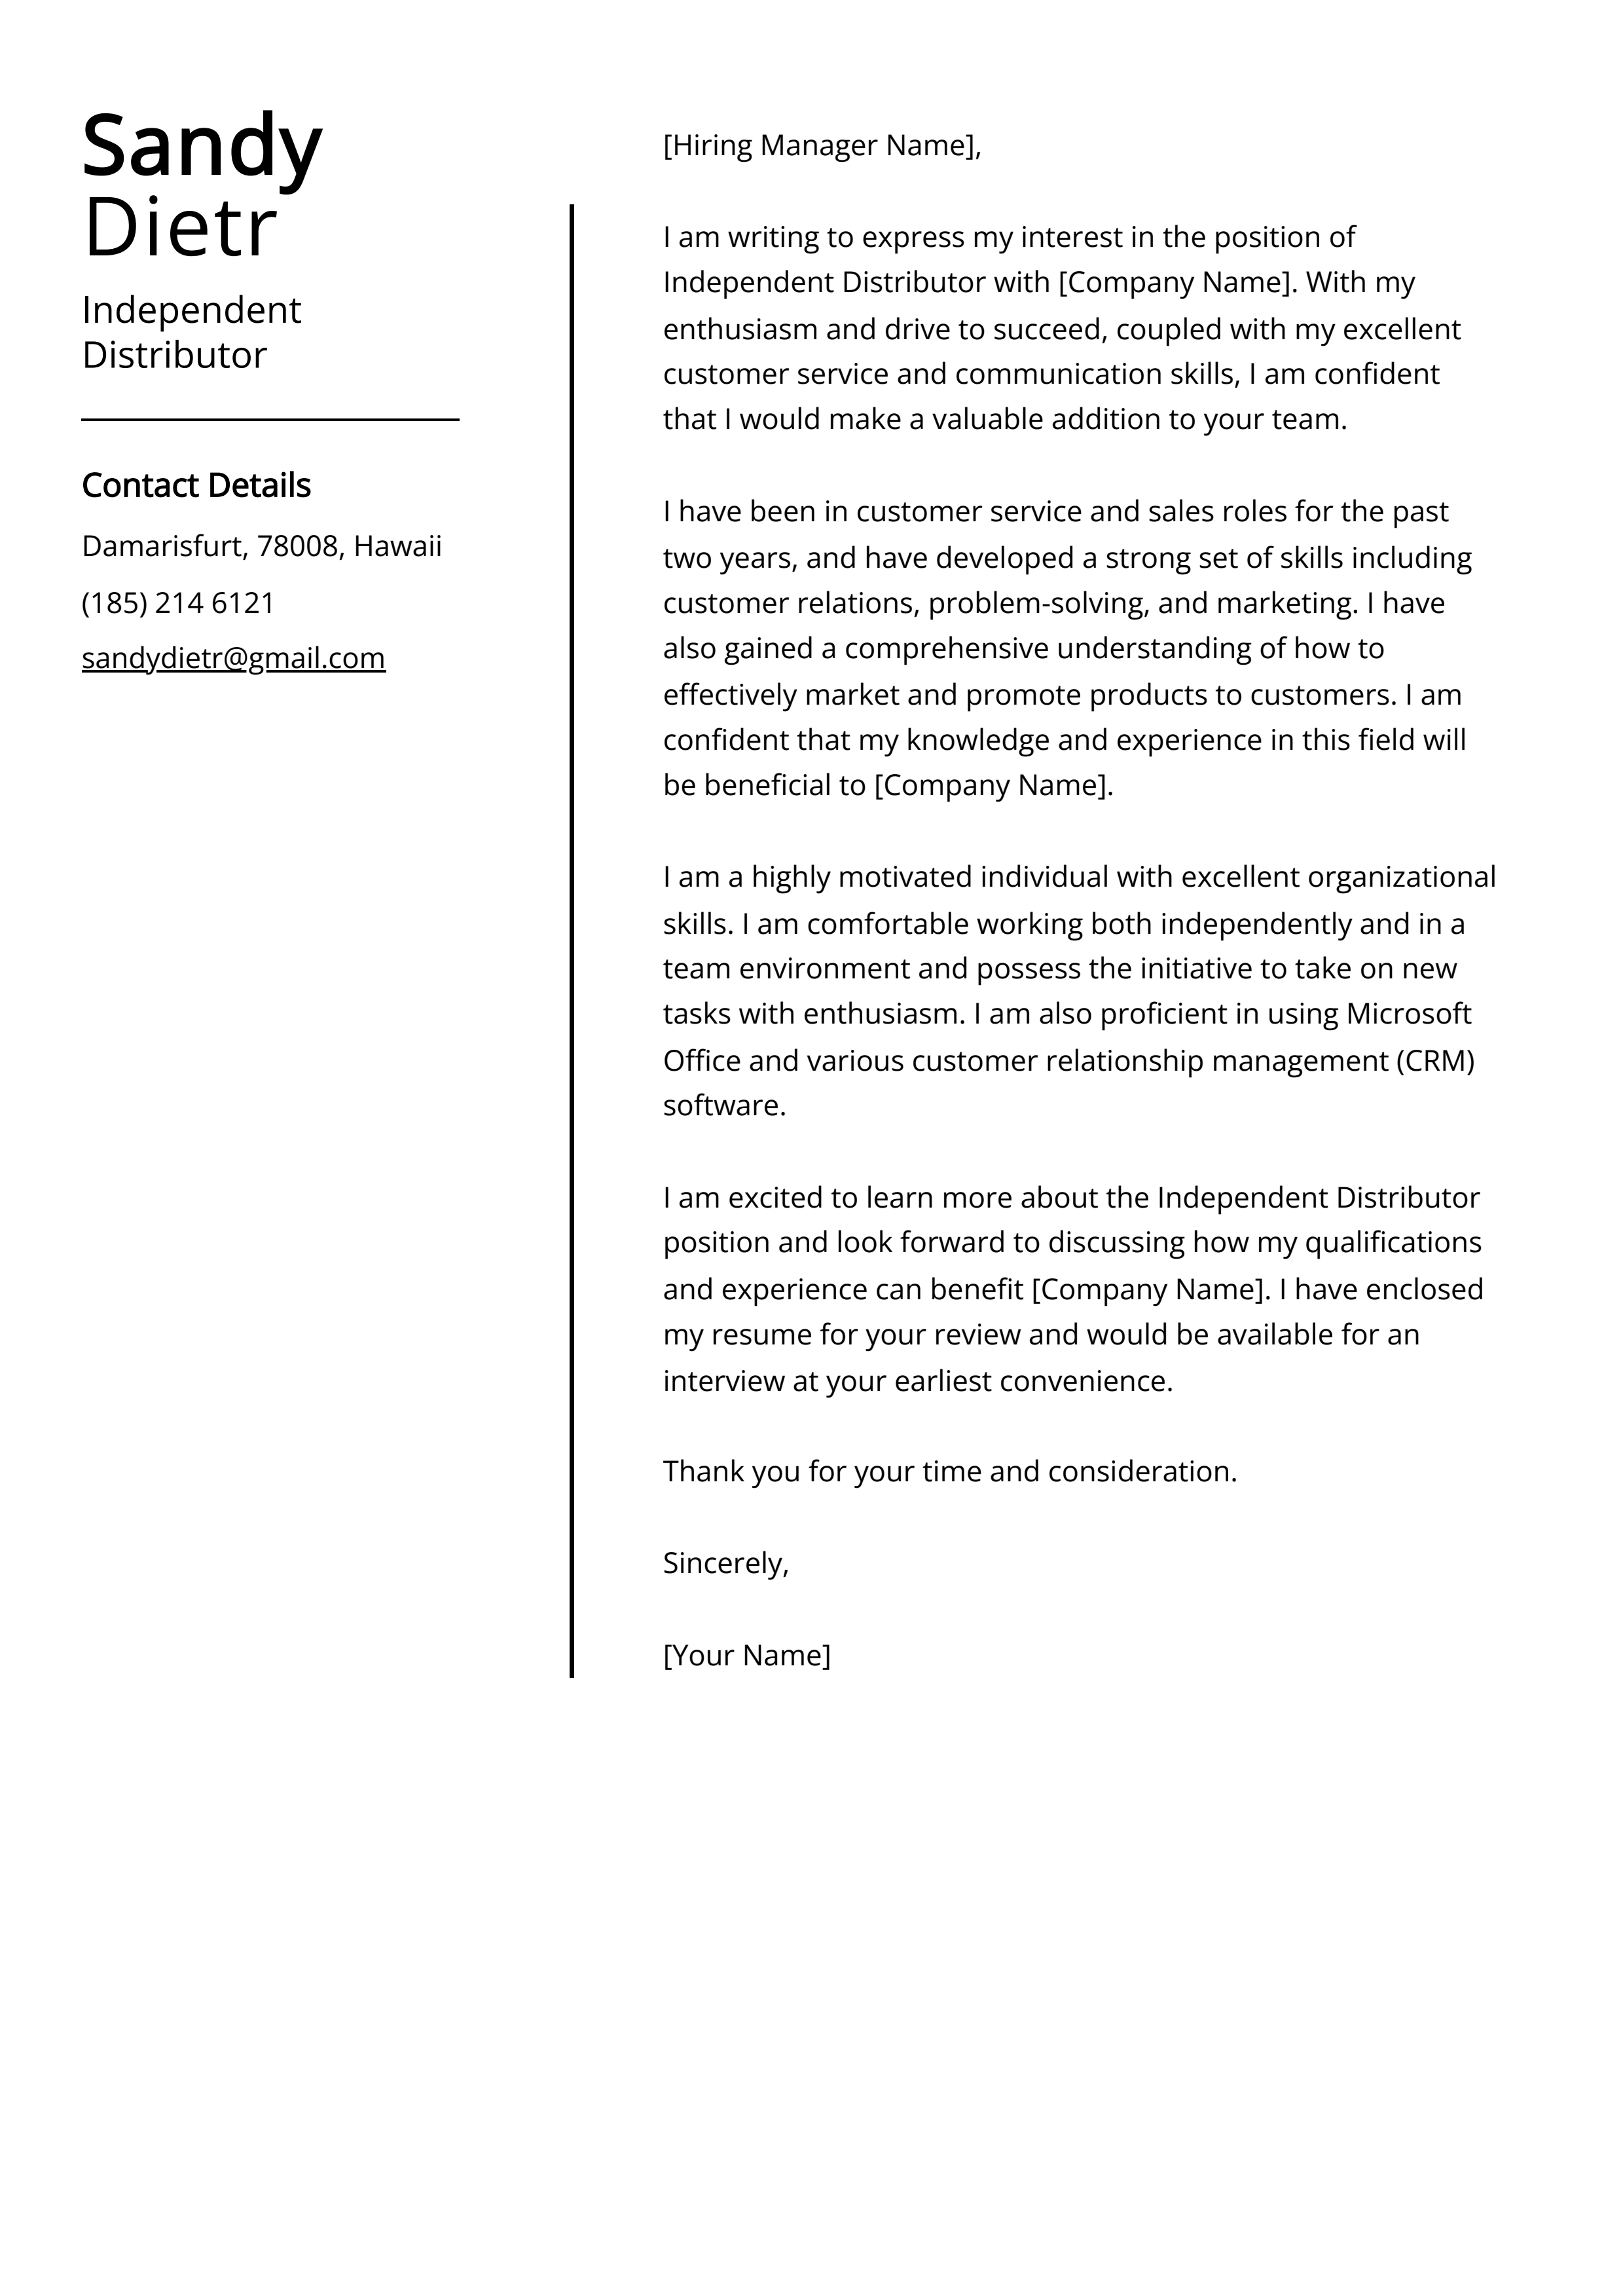 Independent Distributor Cover Letter Example